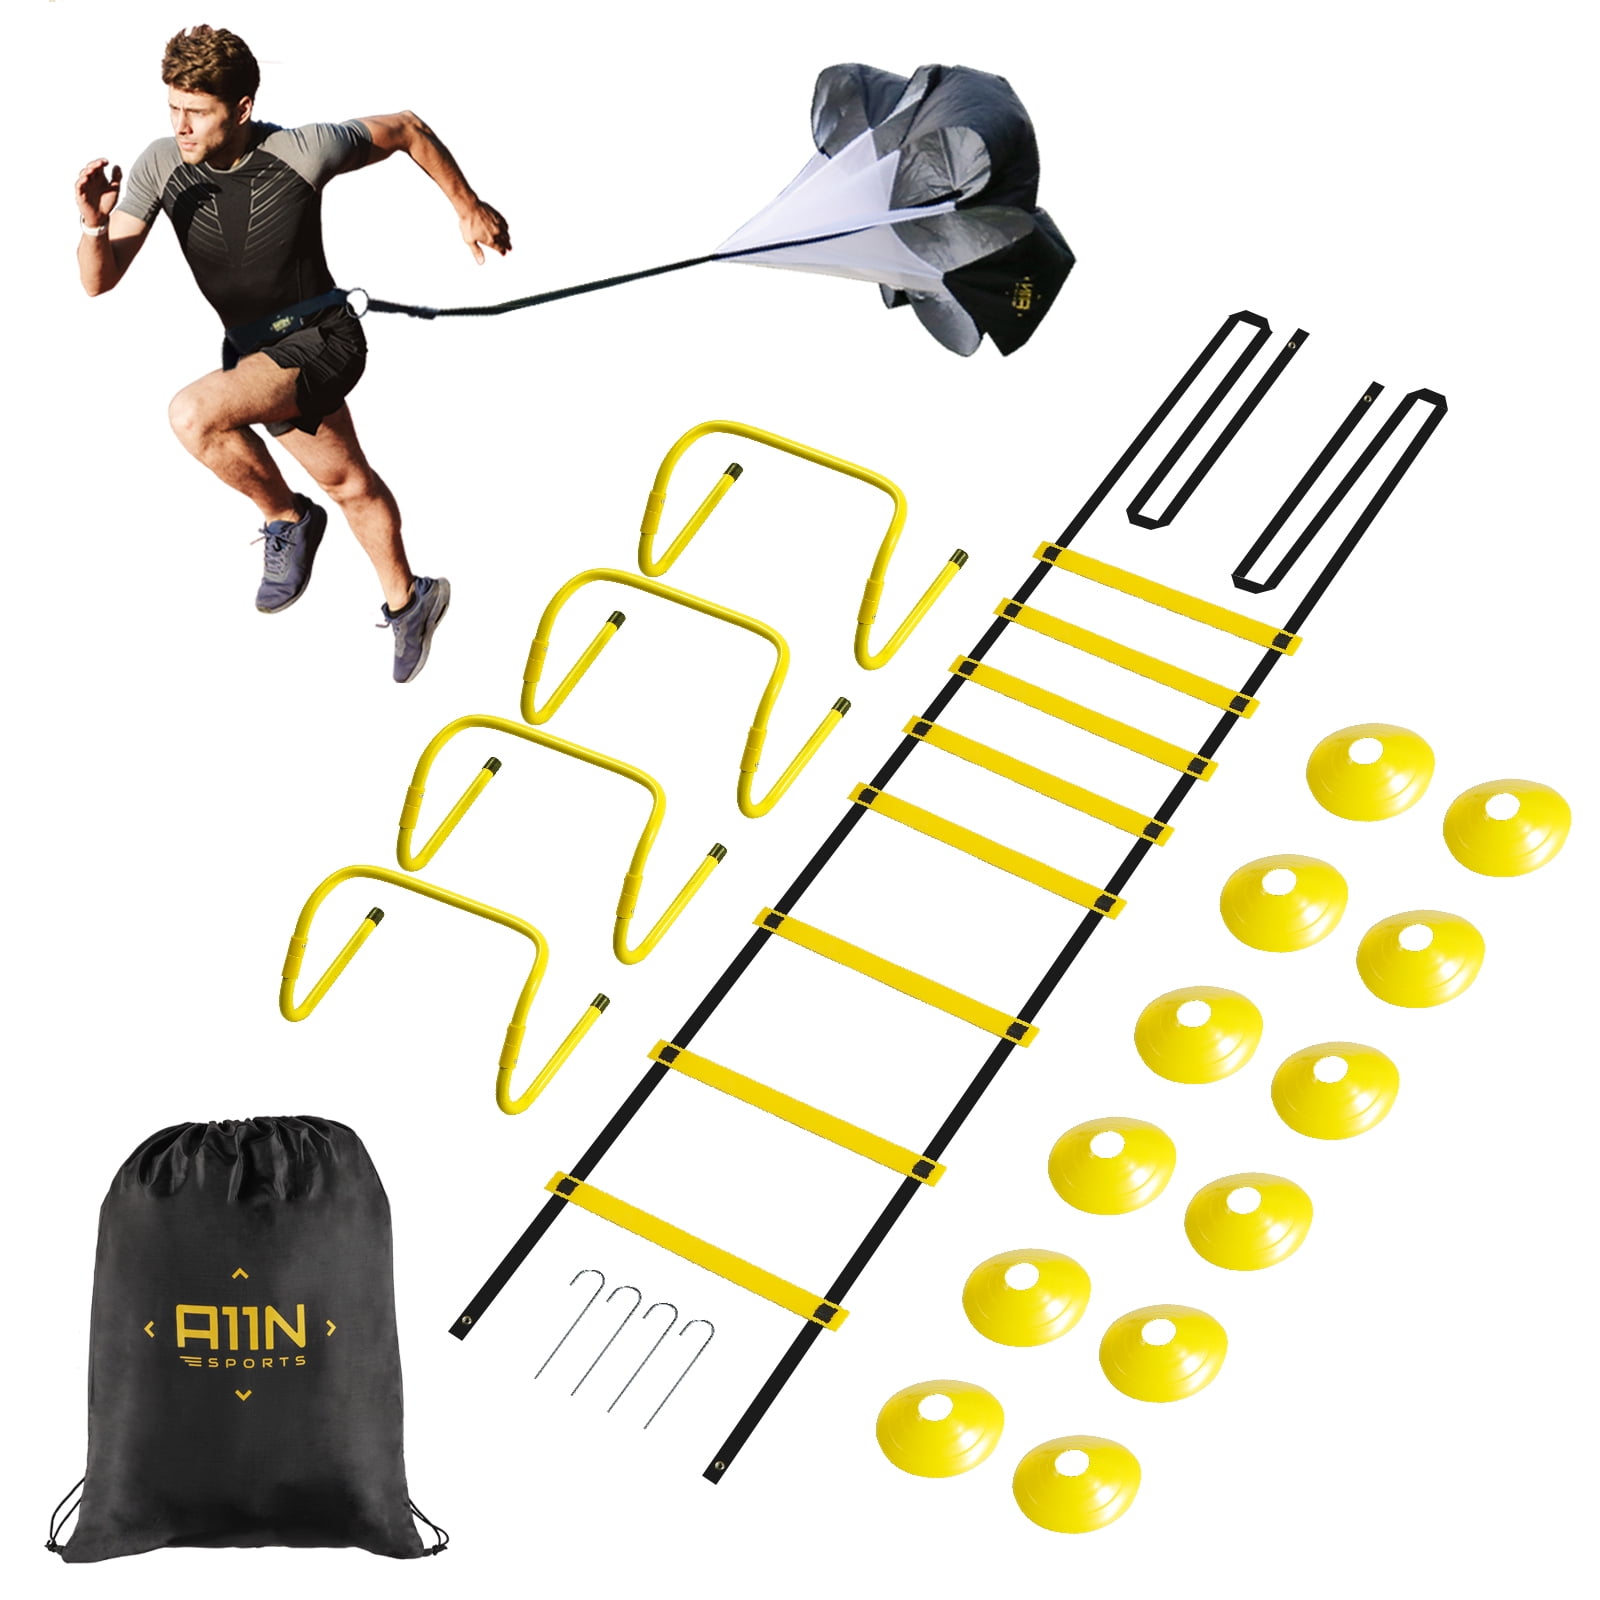 2X Agility Speed Fitness Training Ladder Cone Set Sports Practice 6M Cones Stake